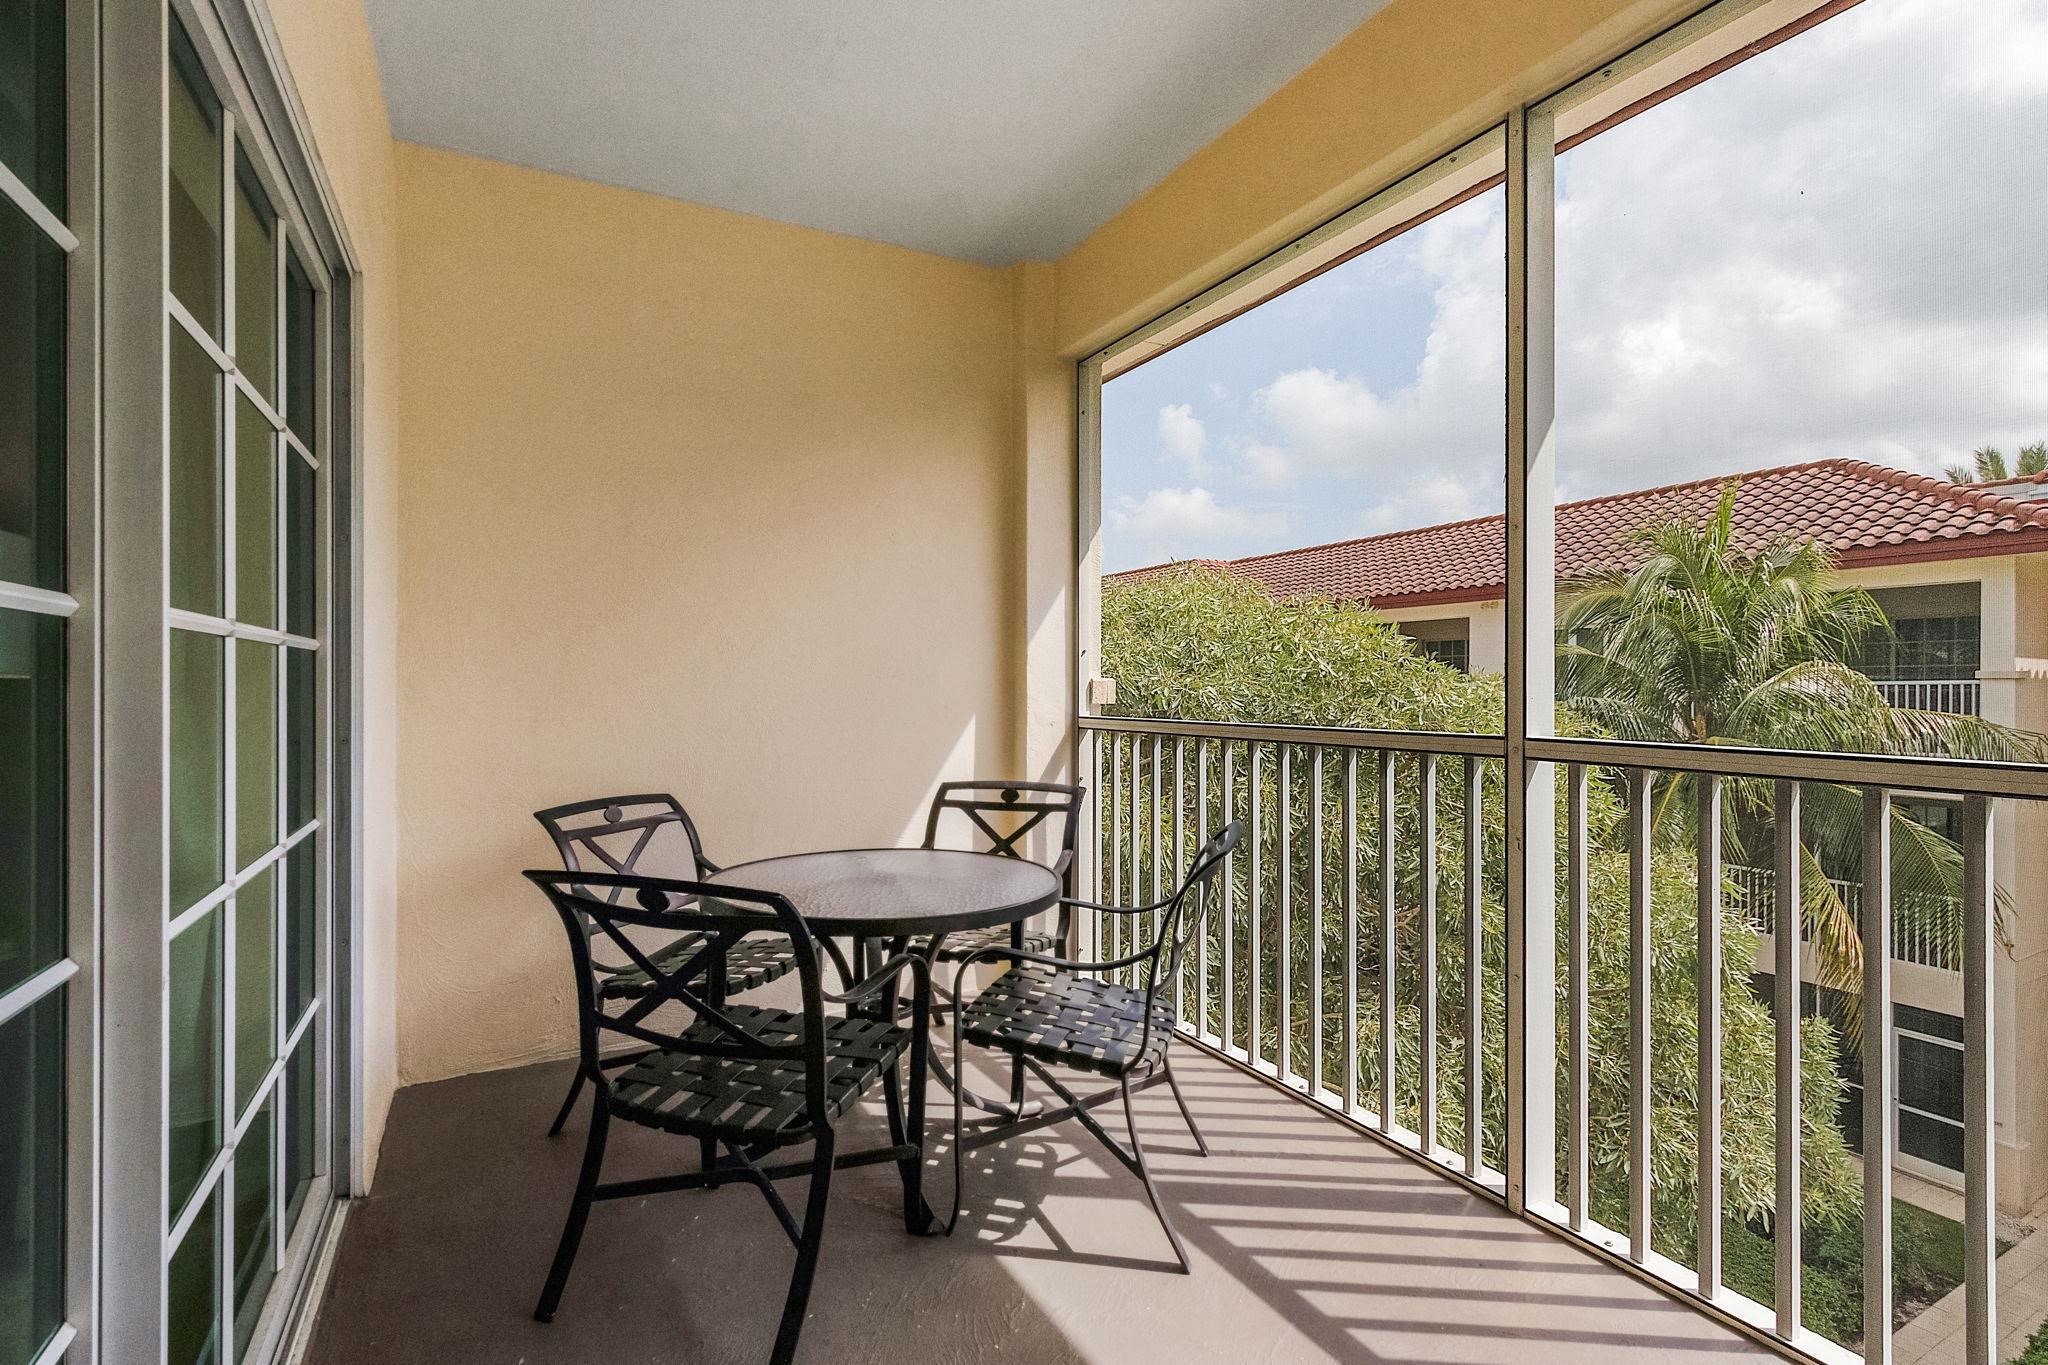 221 9Th St S, Naples, Florida 34102, 1 Bedroom Bedrooms, ,1 BathroomBathrooms,Condo,For Sale,9Th St S,2230455